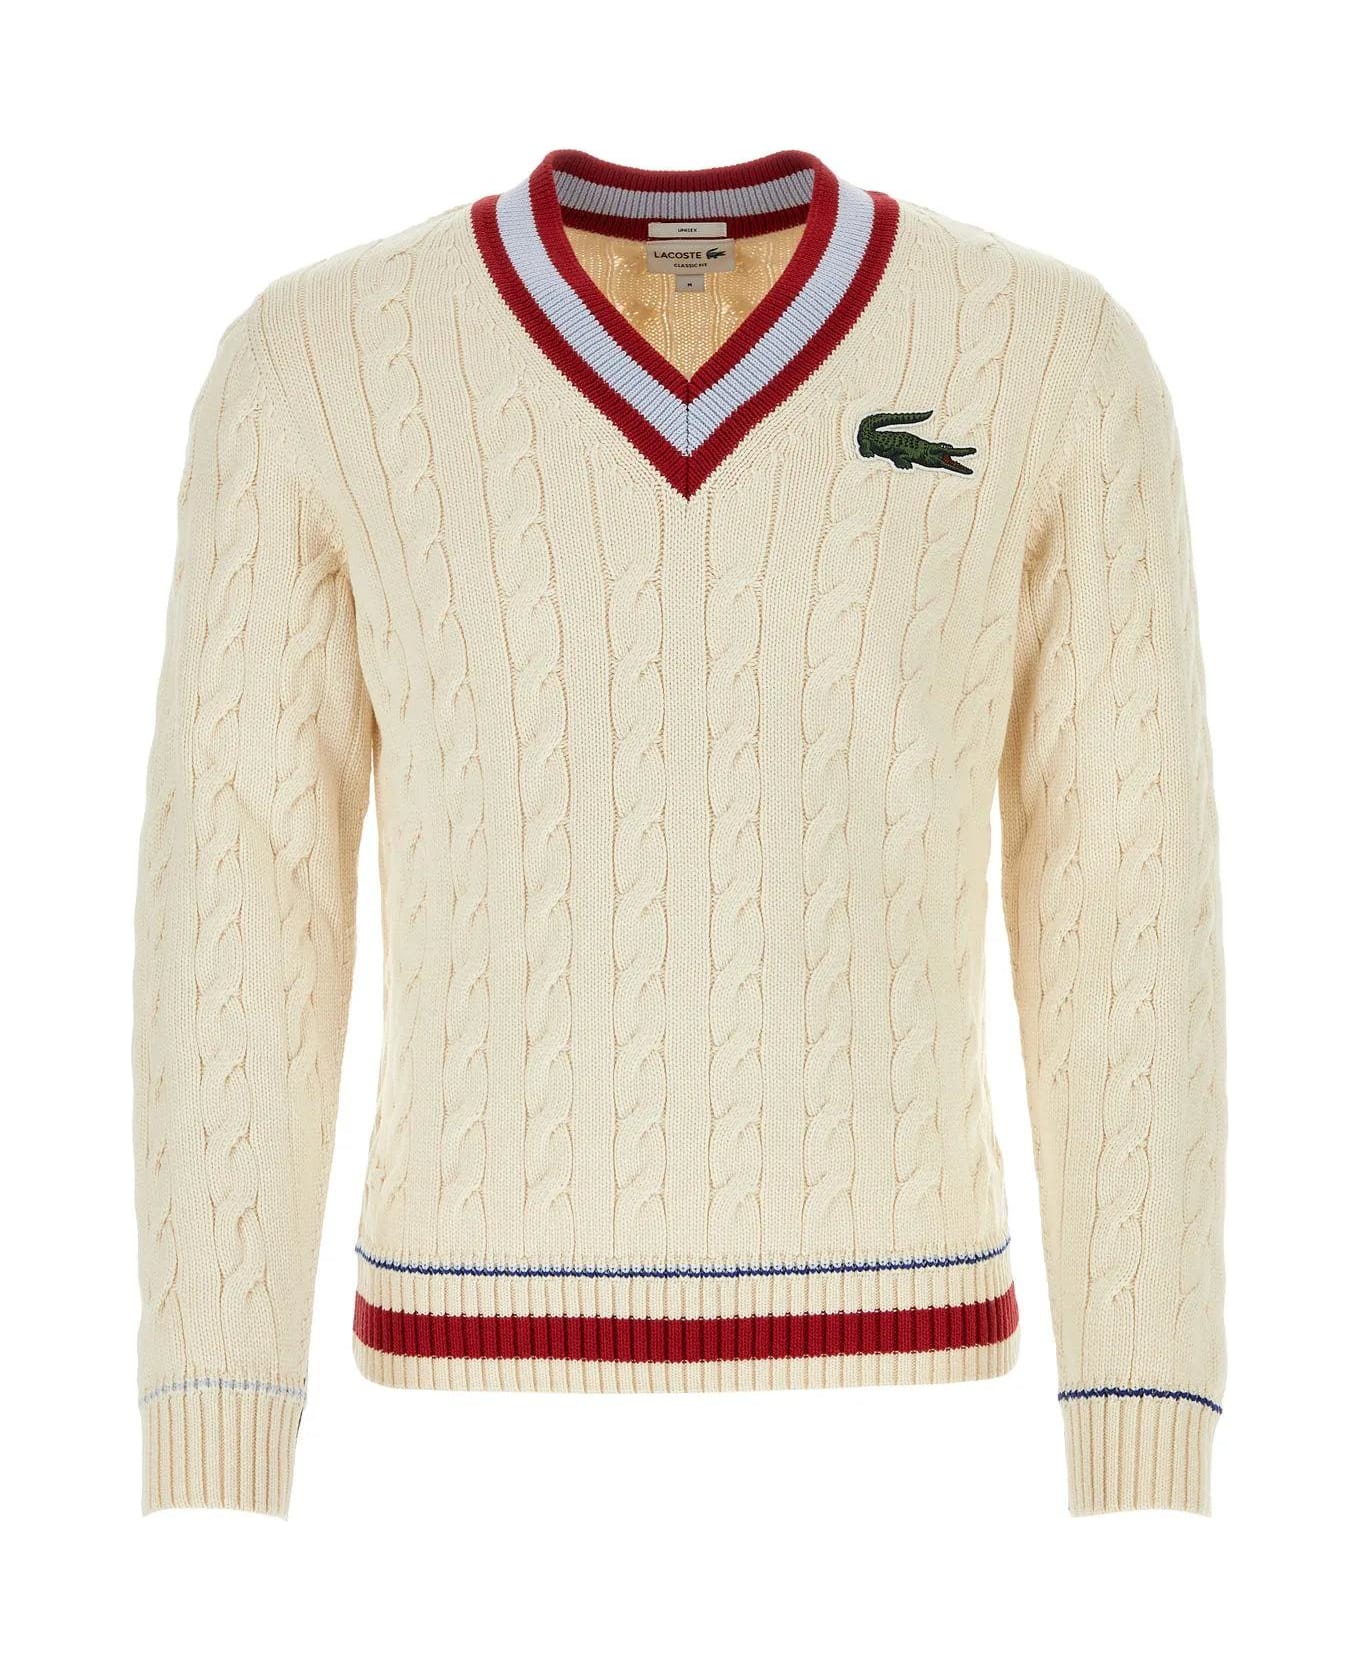 Lacoste Sand Cotton Blend Sweater